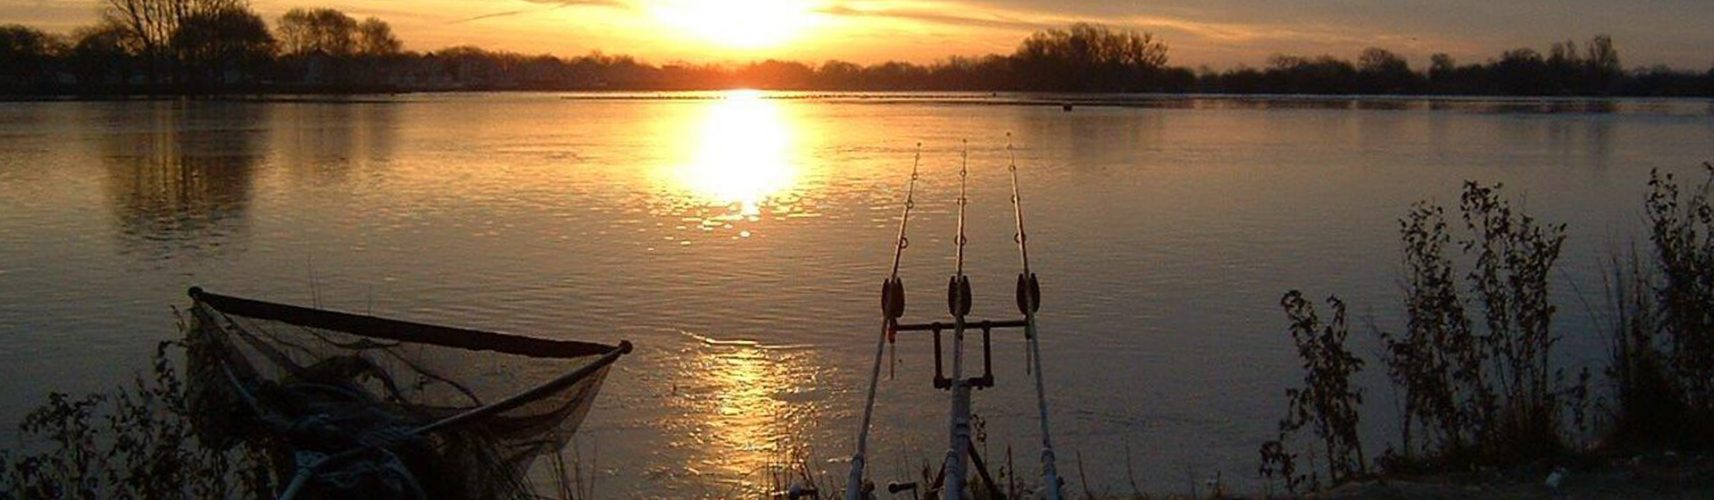 Cotswold Fishing Holiday